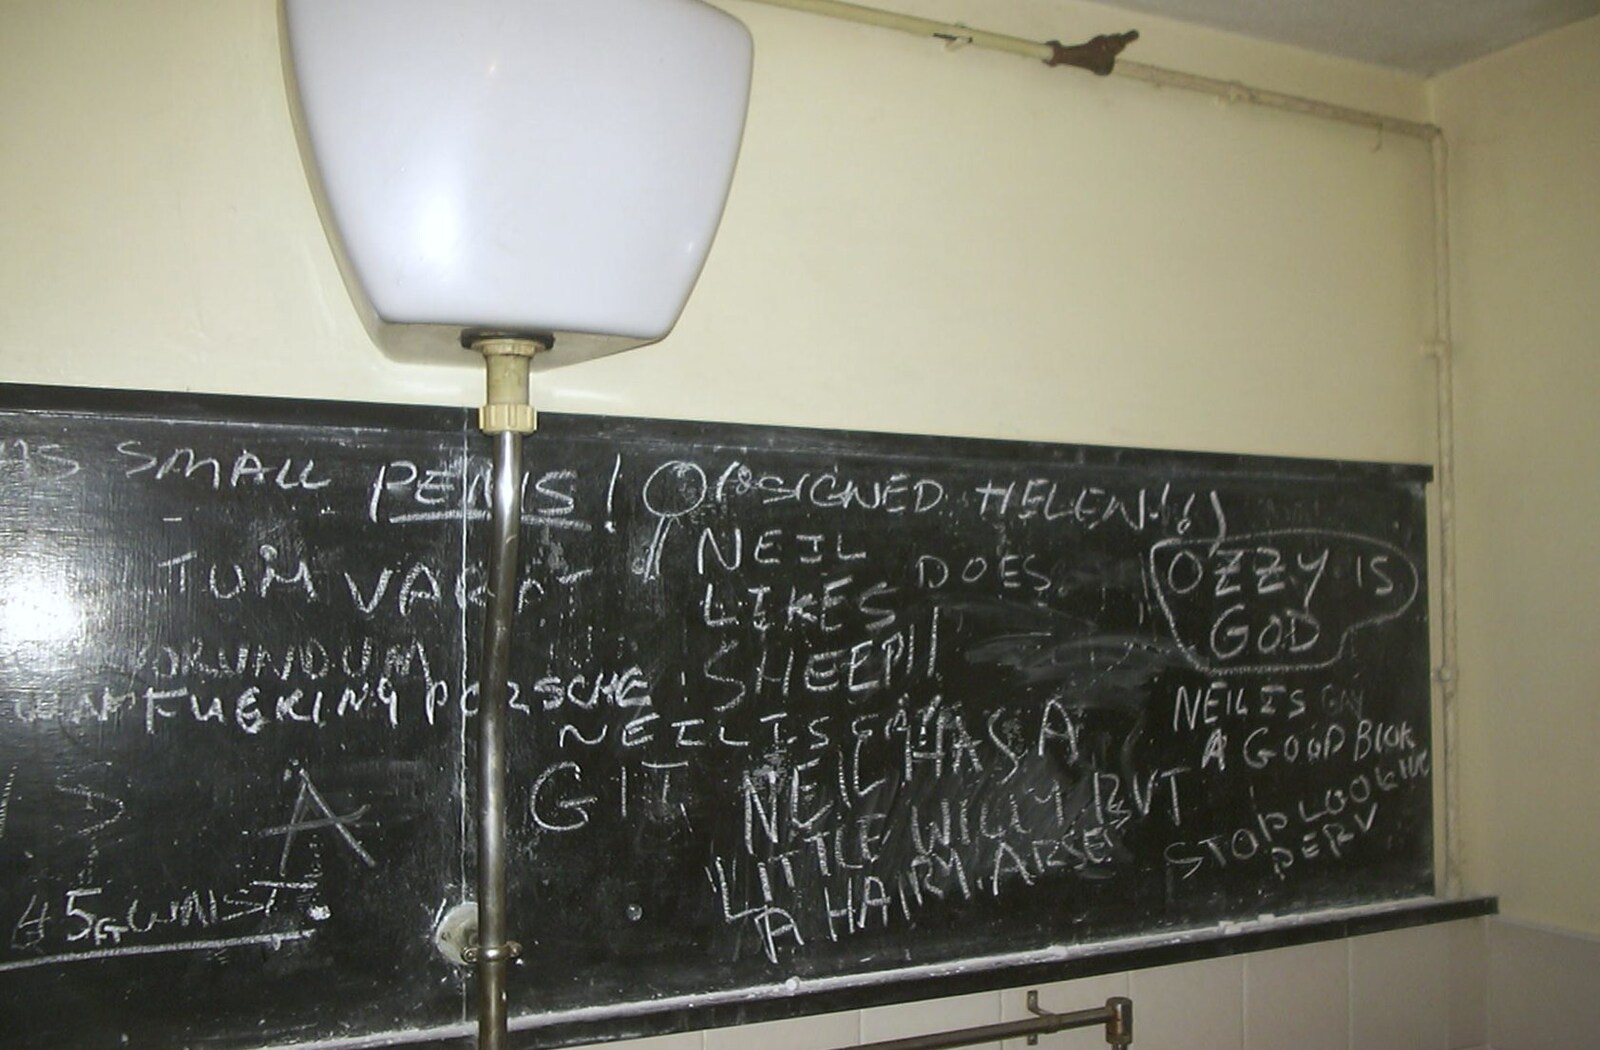 Neil's 30th Birthday at the Swan Inn, Brome, Suffolk - 5th April 2003: The blackboard in the bogs has been busy